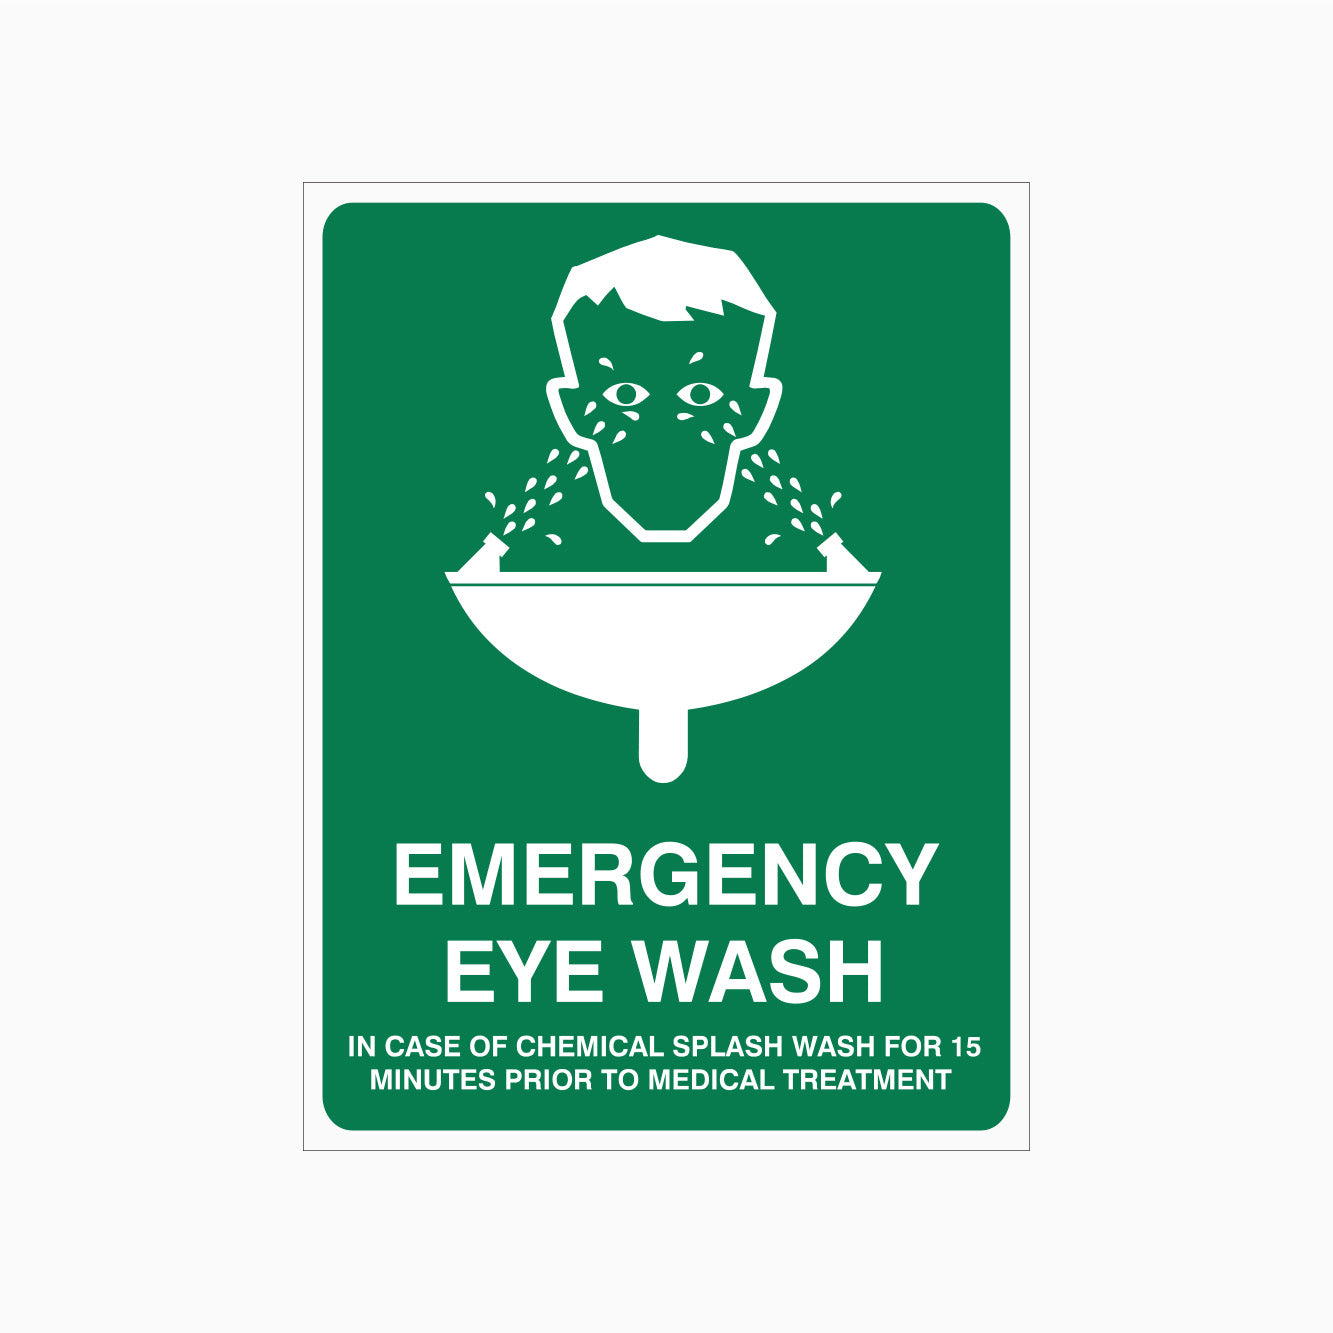 EMERGENCY EYE WASH SIGN - IN CASE OF CHEMICAL SPLASH WASH FOR 15 MINUTES PRIOR TO MEDICAL TREATMENT SIGN